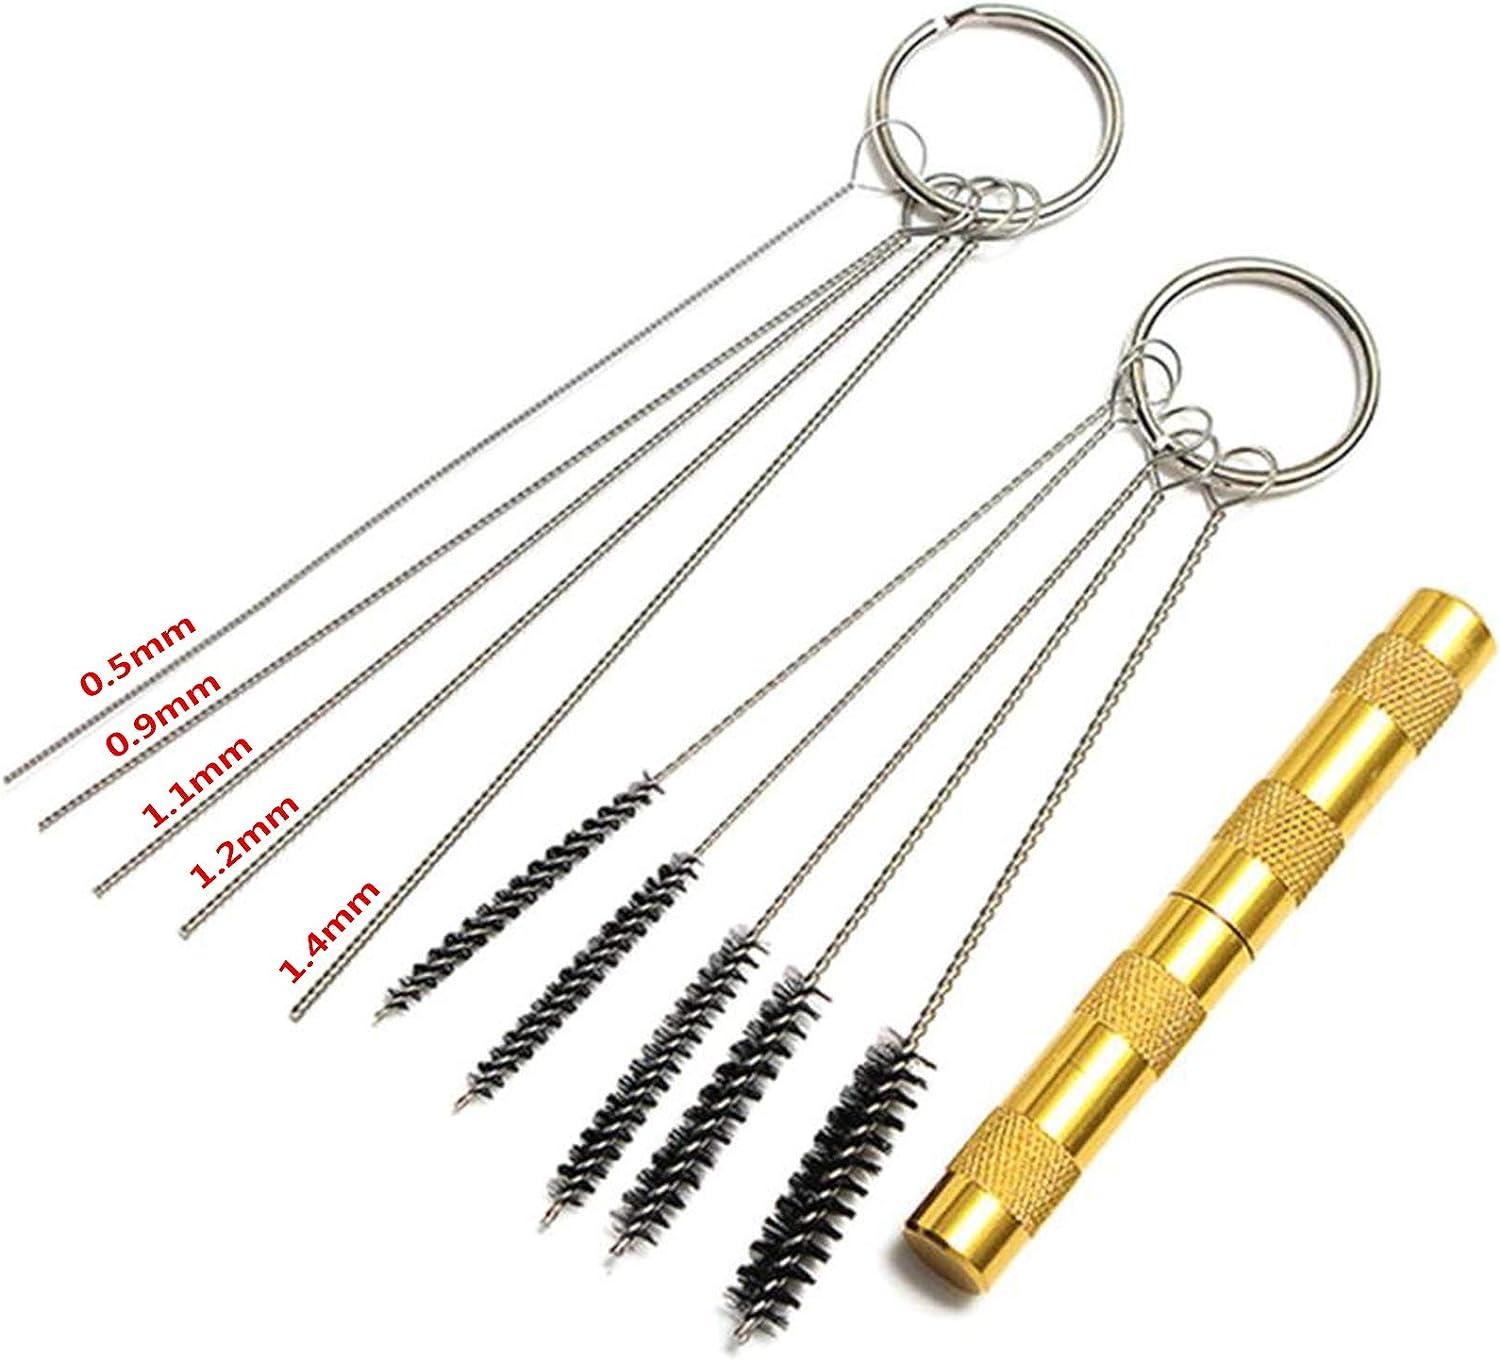 Uouteo 0.2mm 0.3mm 0.5mm Airbrush Nozzles and Needles Replacement Parts  with 11 in 1 Airbrush Cleaning Repair Tool for Airbrush Gun 0.2mm 0.3mm  0.5mm/Cleaning Kit